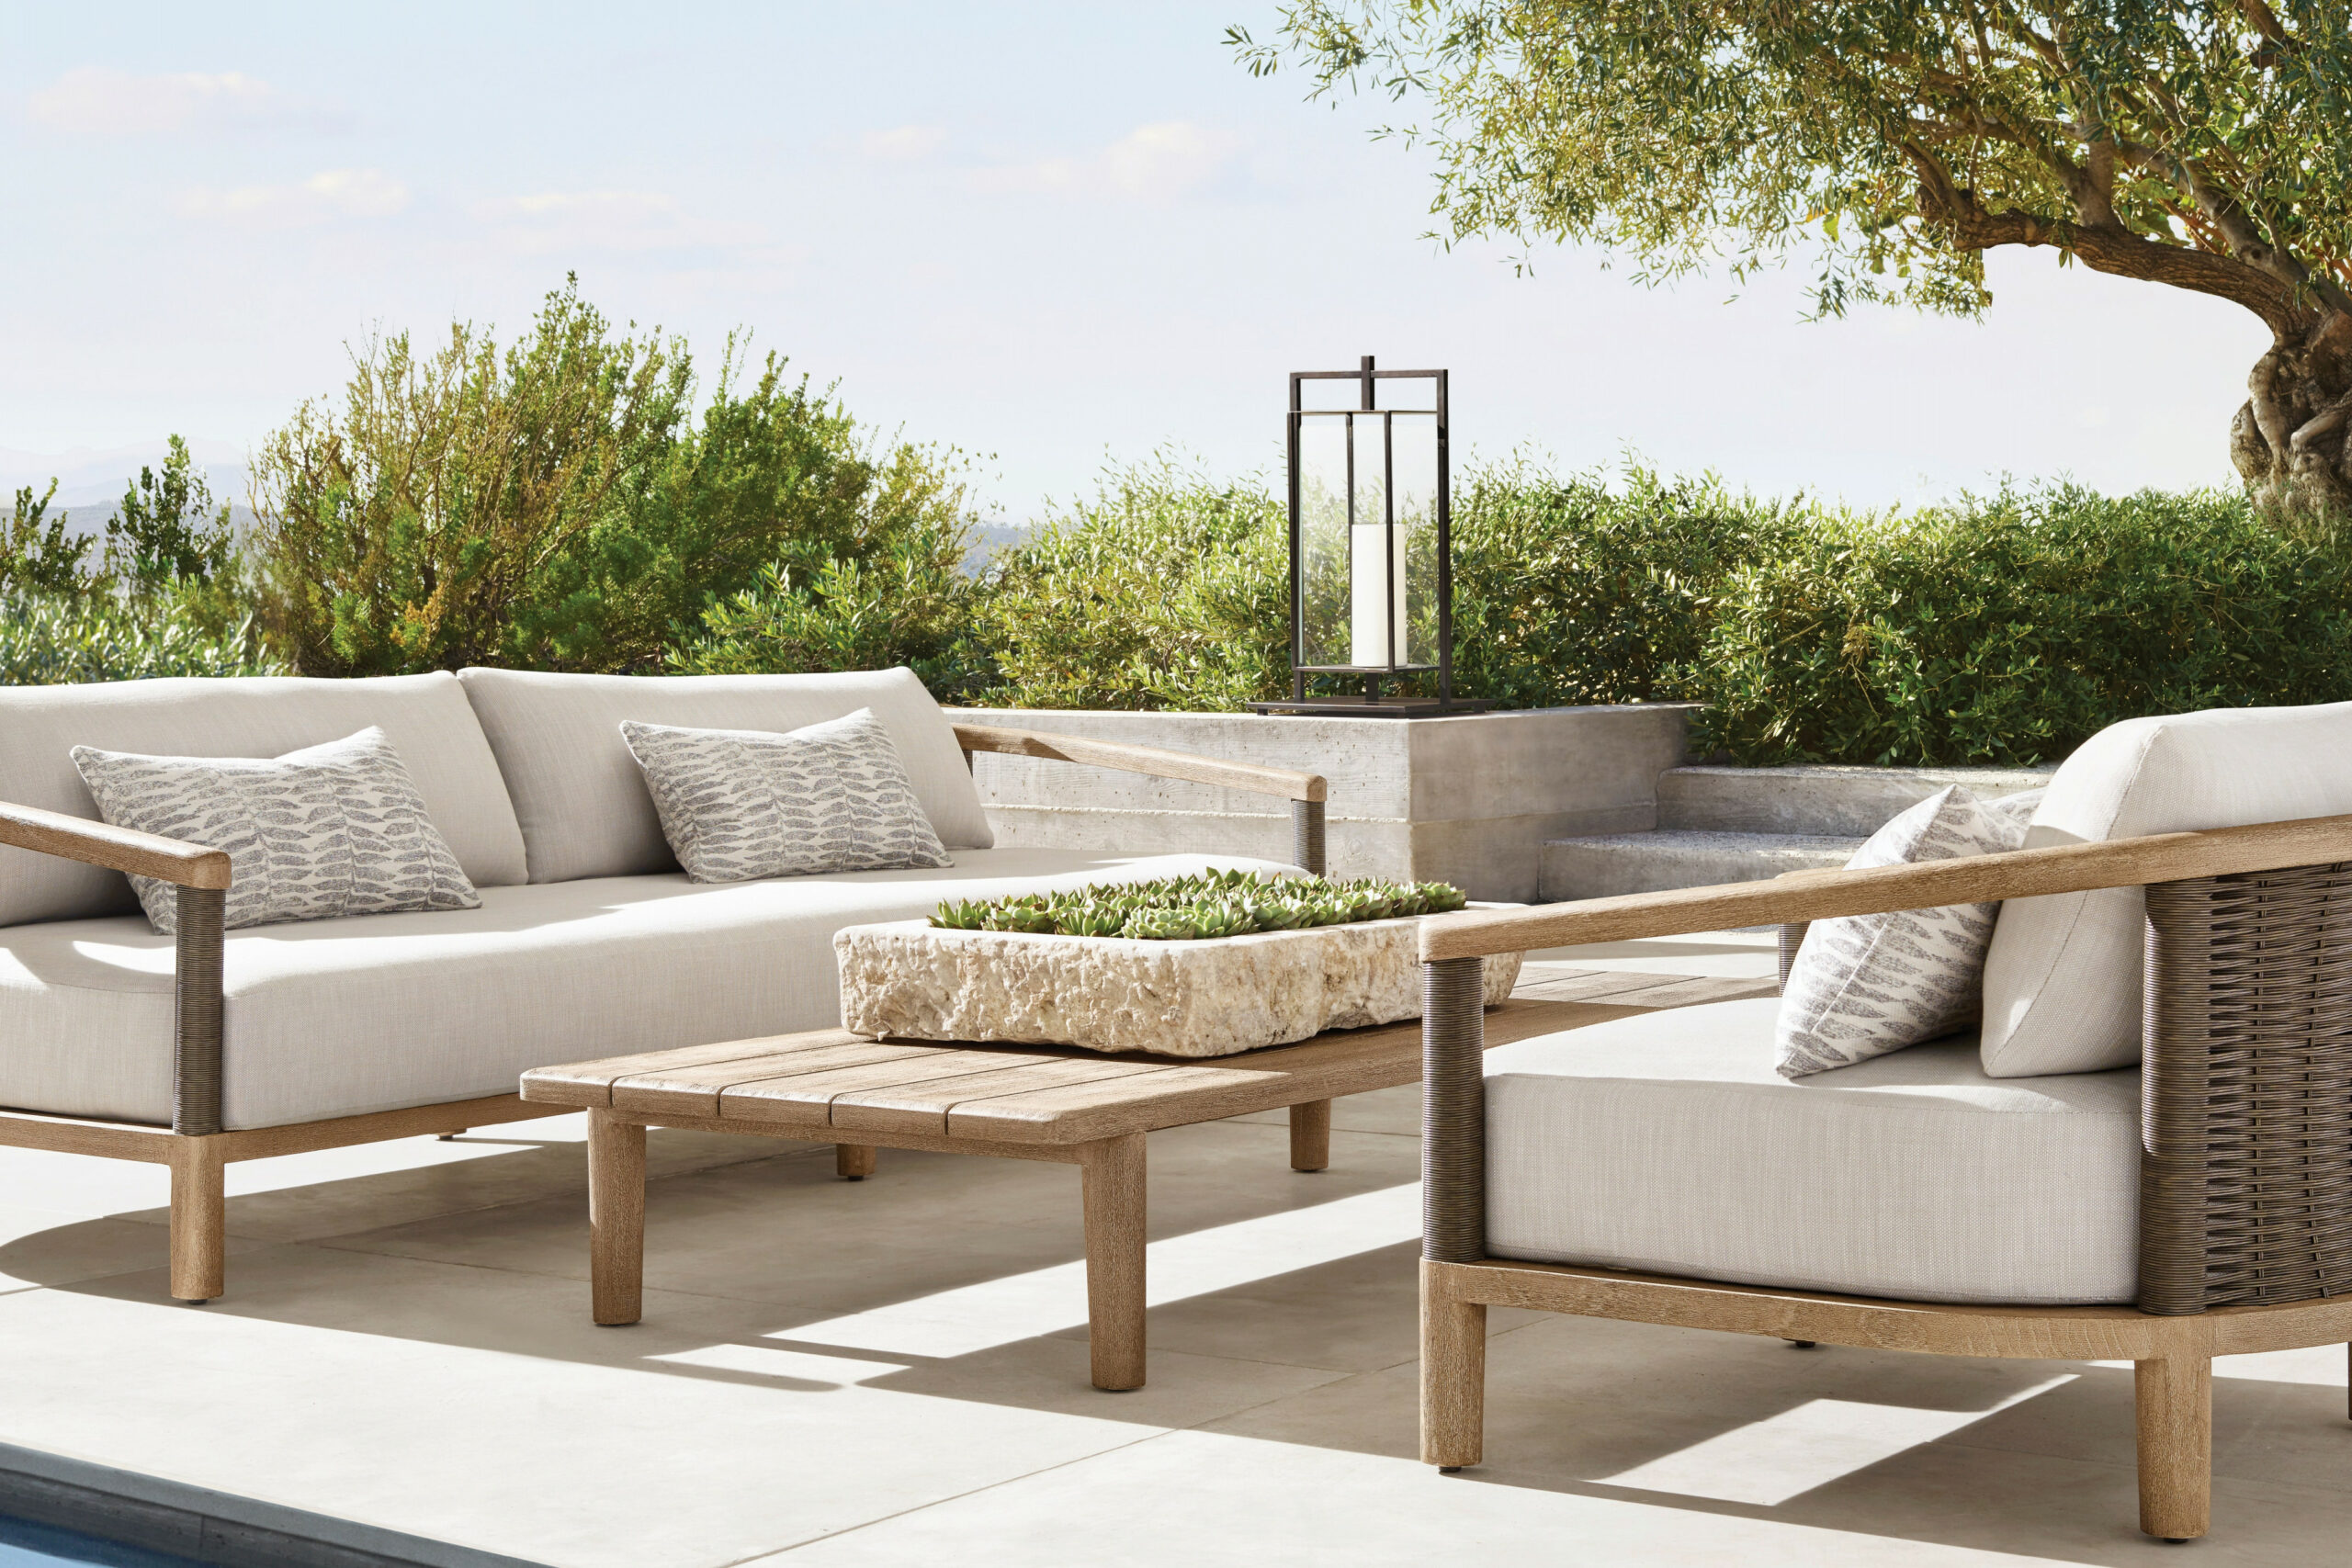 Here Are All the New Outdoor Product Collections From RH